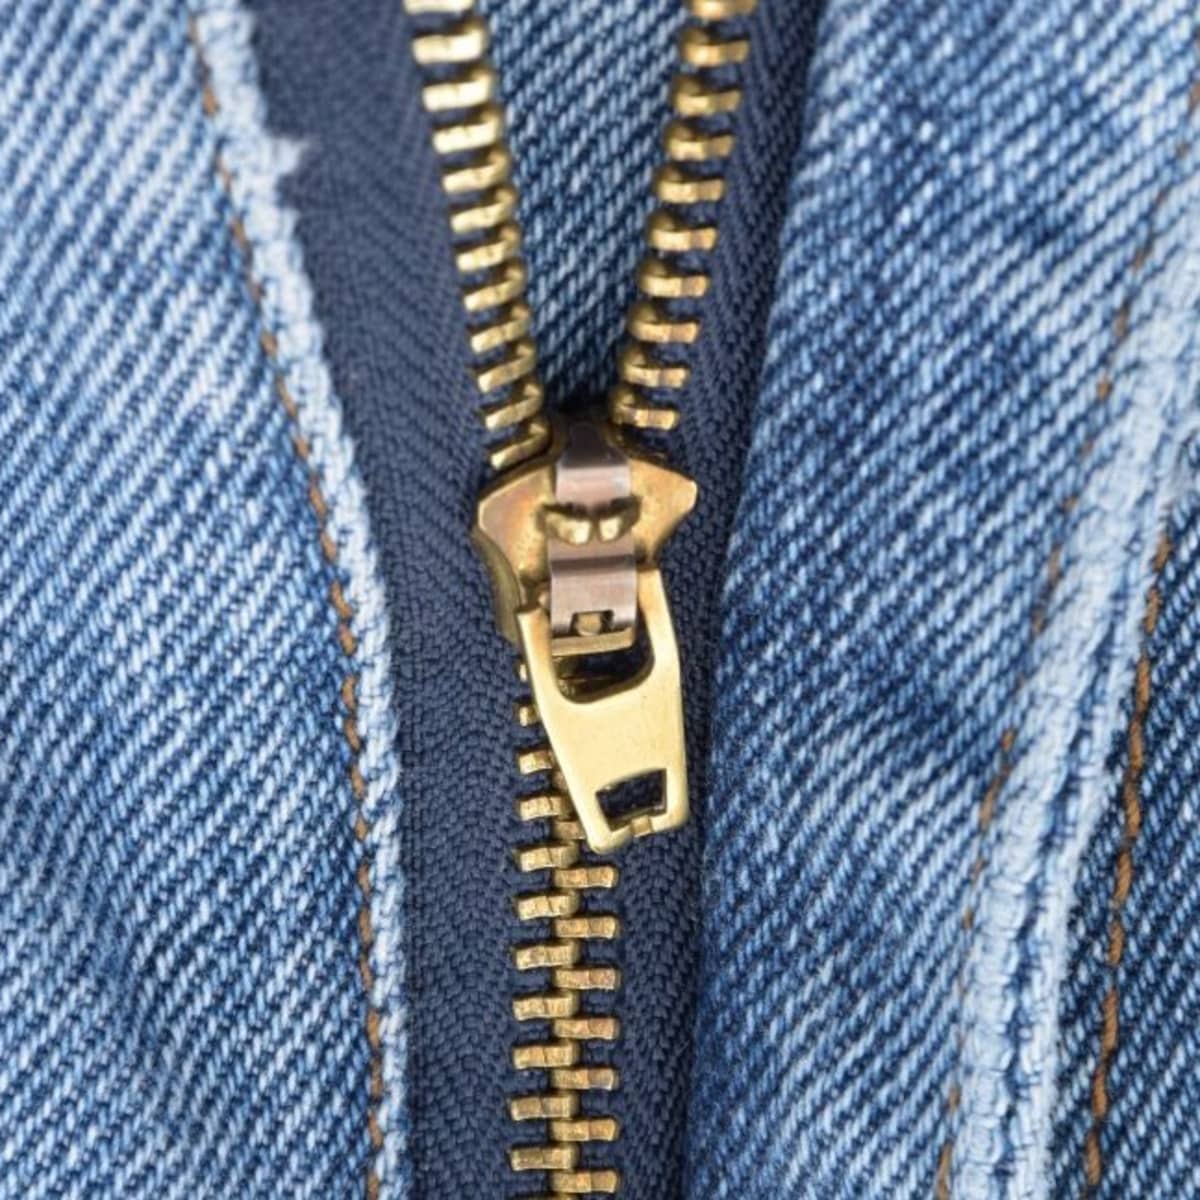 How to Fix a Zipper: 3 Things You Can Try (With Pictures) - Dengarden